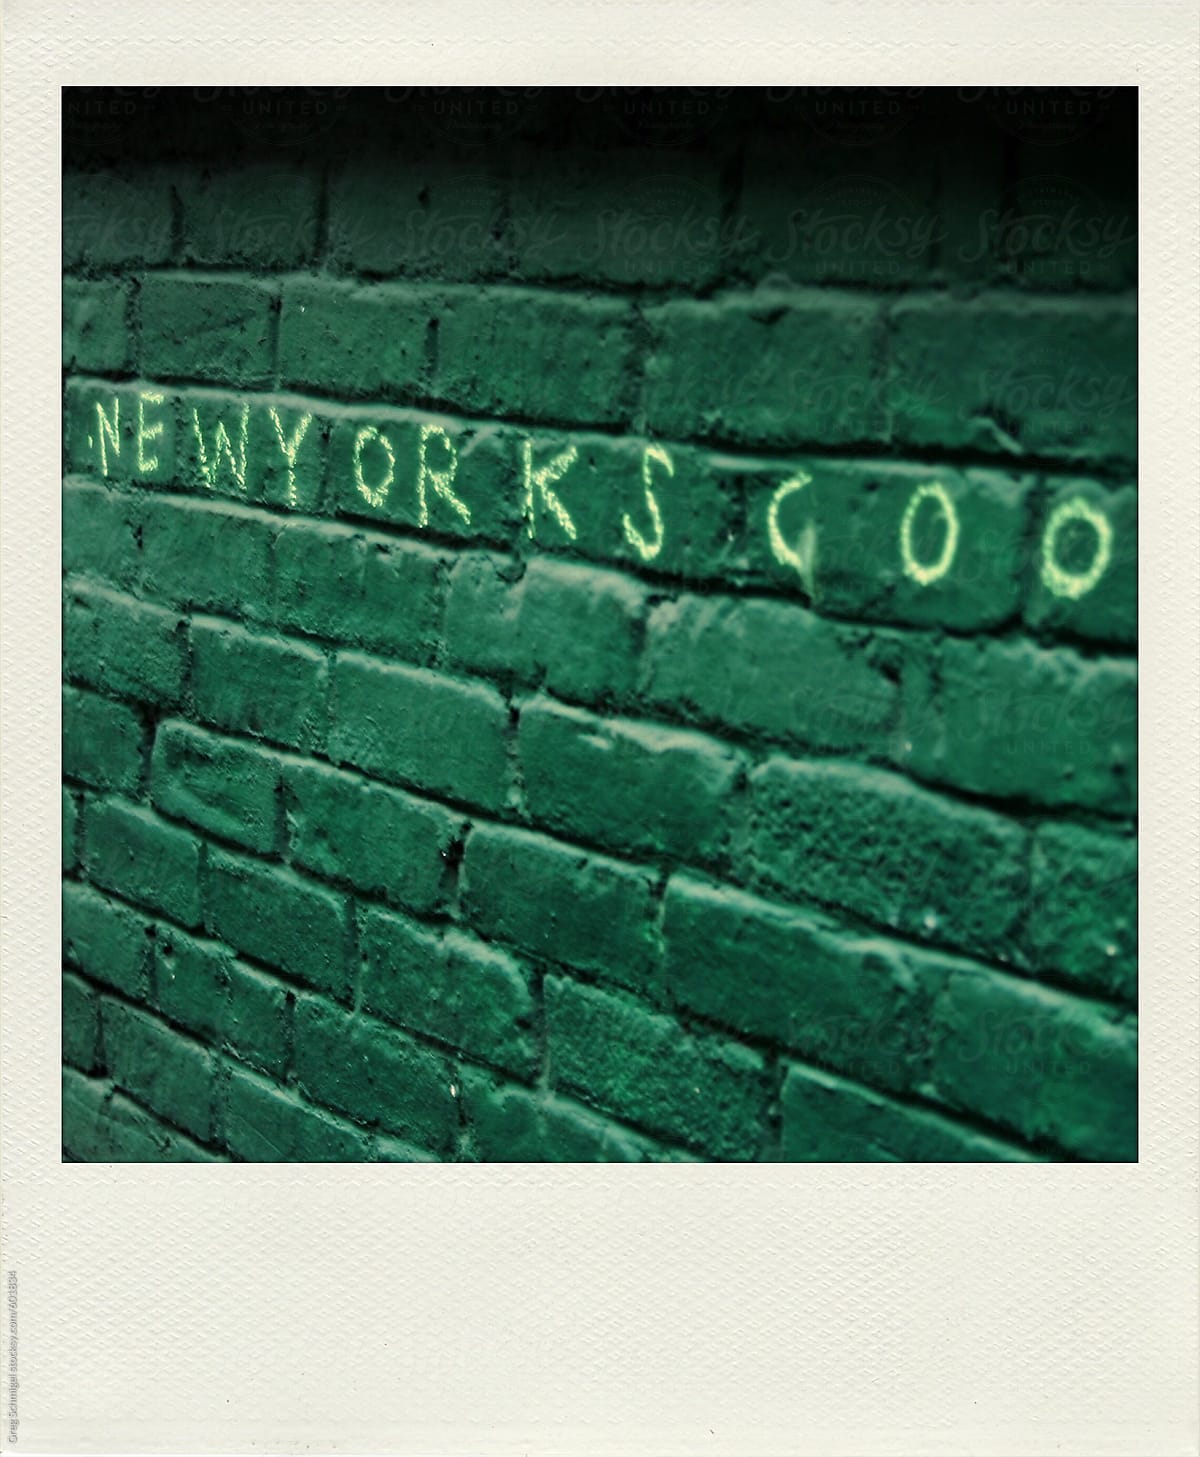 Old polaroid snapshot print of a green brick wall with New York\'s Cool written on it